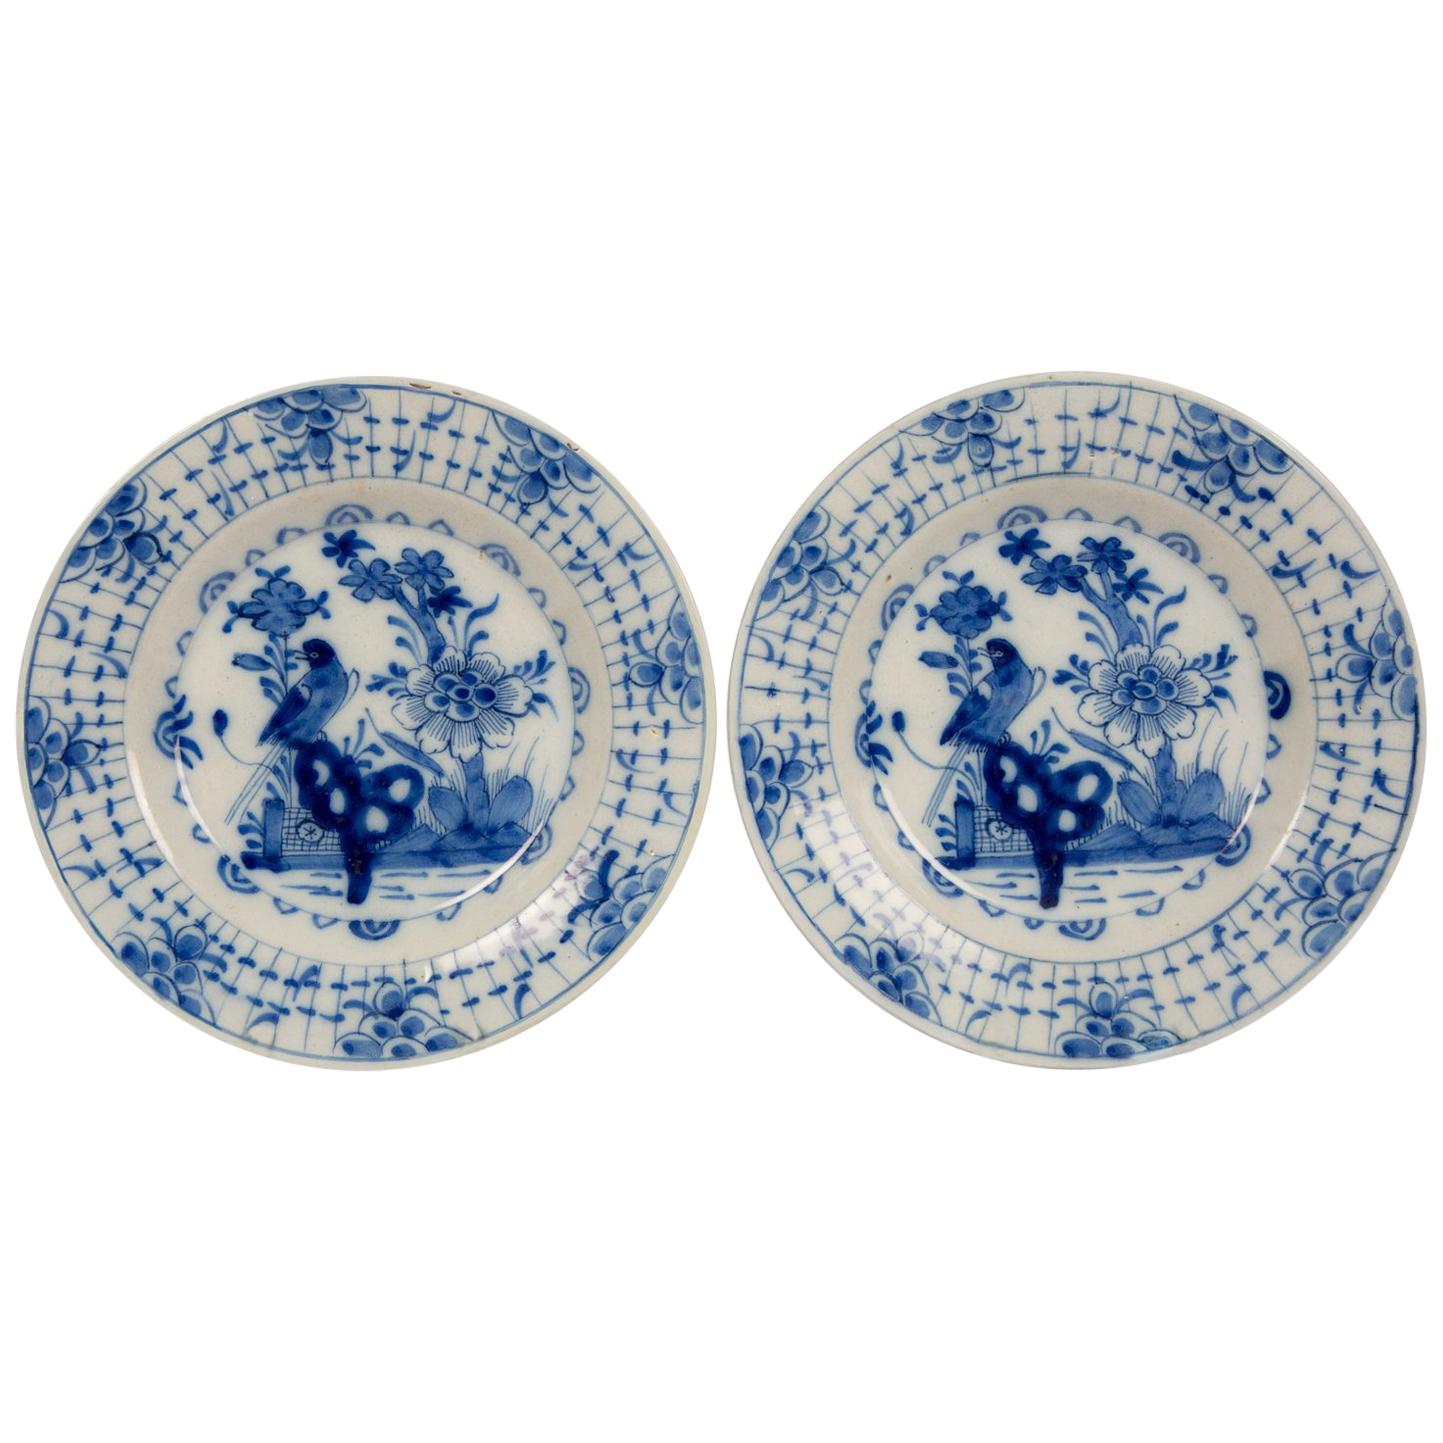 Pair of Antique Blue and White Dutch Delft Dishes Early 19th century Circa 1820